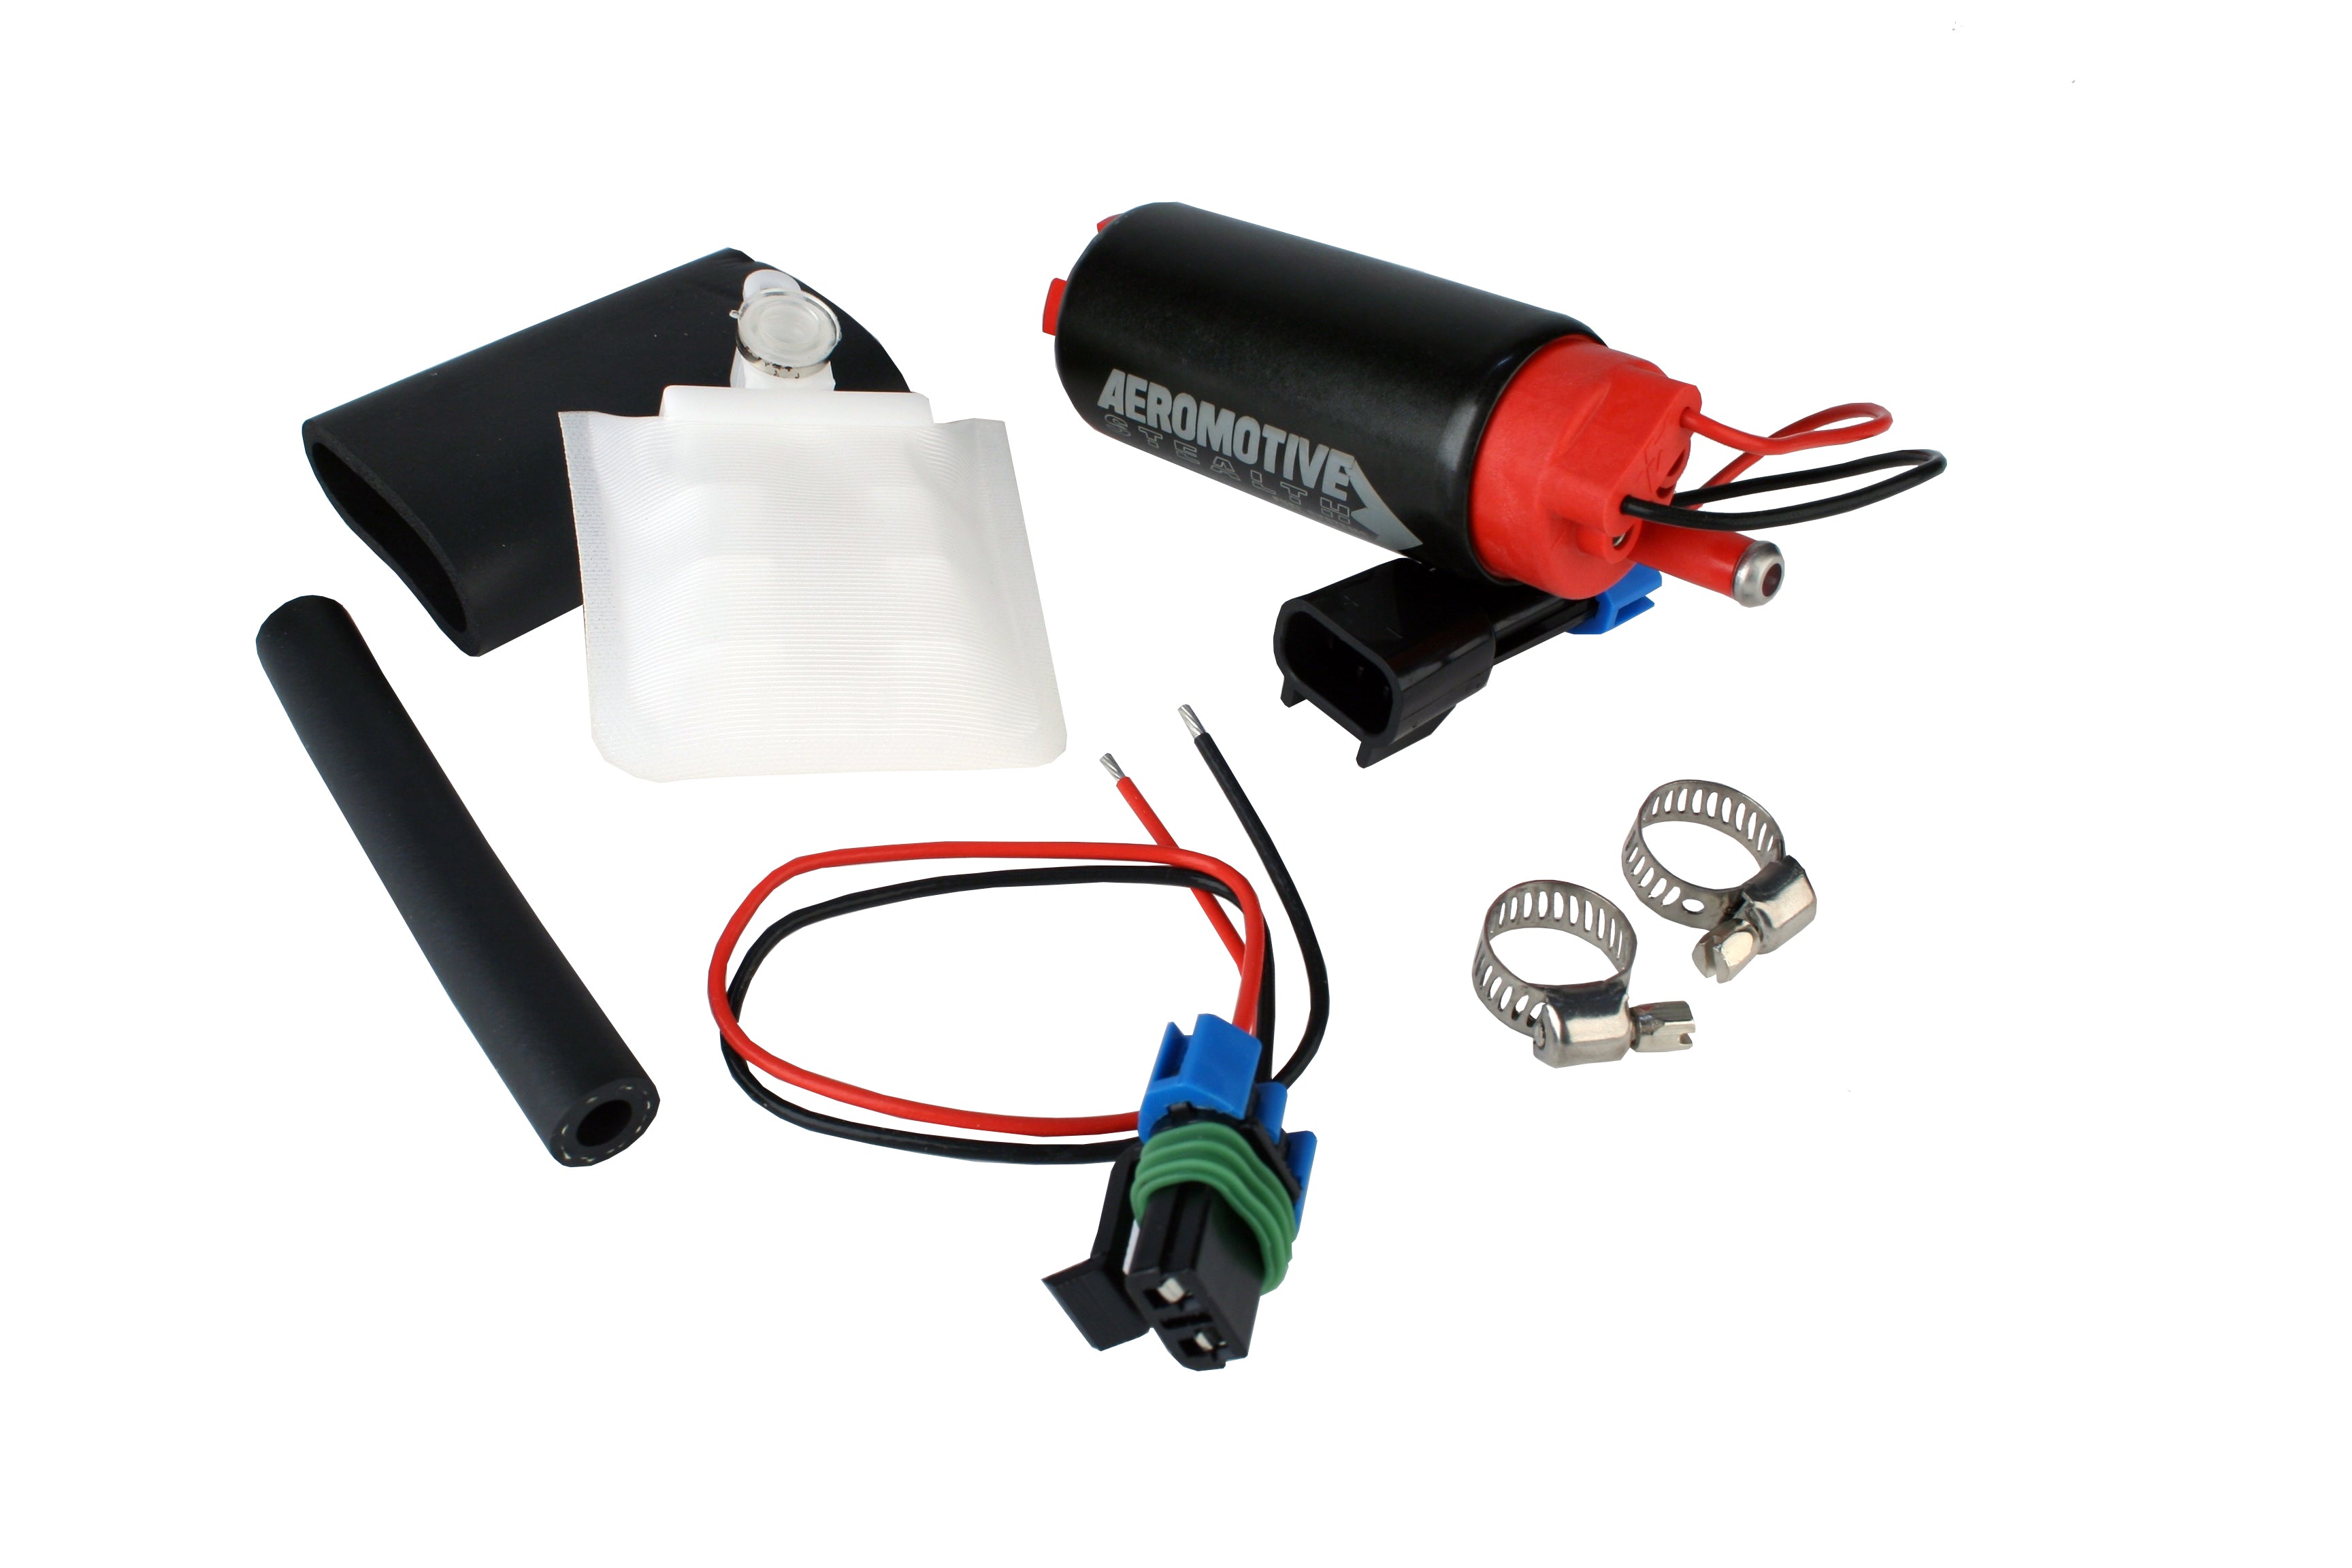 AEROMOTIVE 11542 Fuel Pump, 340lph, E85 compatible, Offset Inlet - Inlet inline w / outlet (This item will supersede P / N 11142) Photo-2 